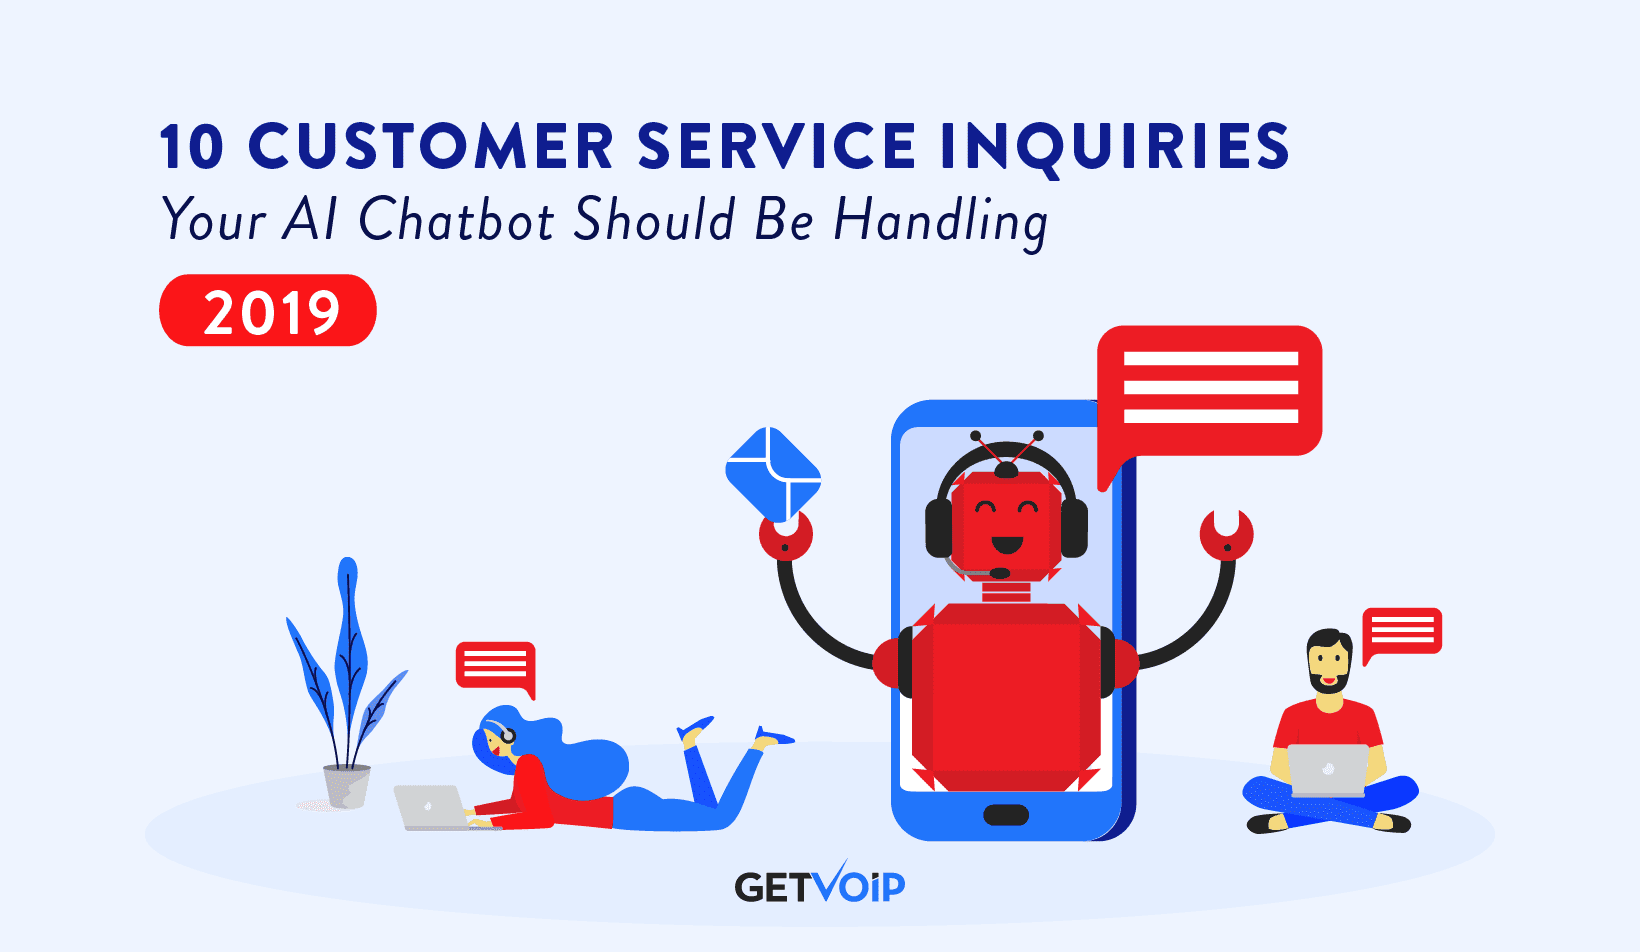 10 Customer Service Inquiries Your AI Chatbot Should Be Handling in 2019